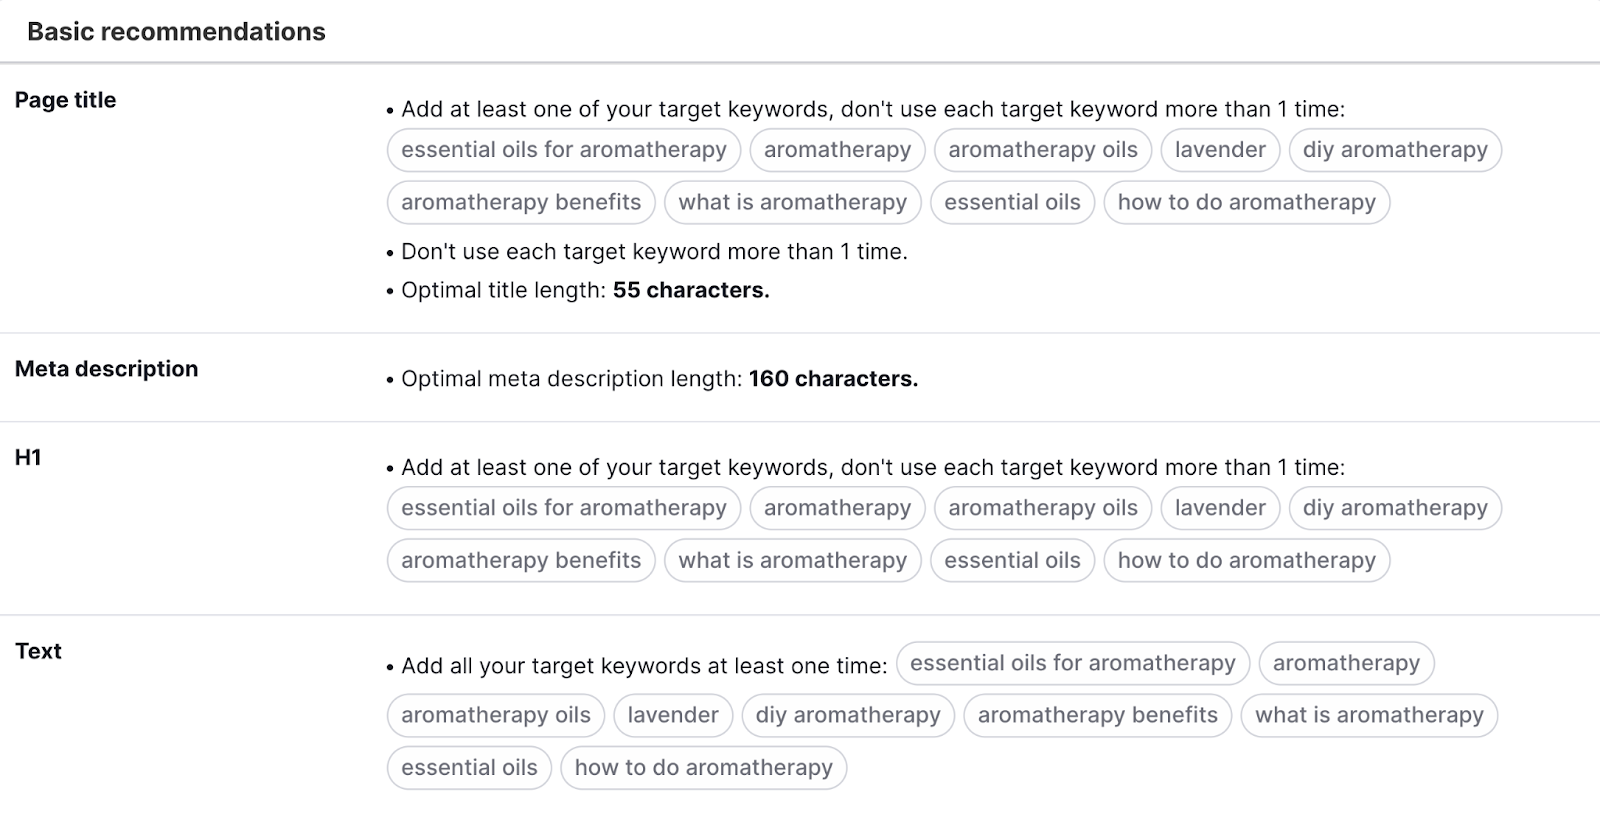 SEO recommendations for your content outline include page title, target keywords, meta description length, and how to use target keywords in the h1 tag